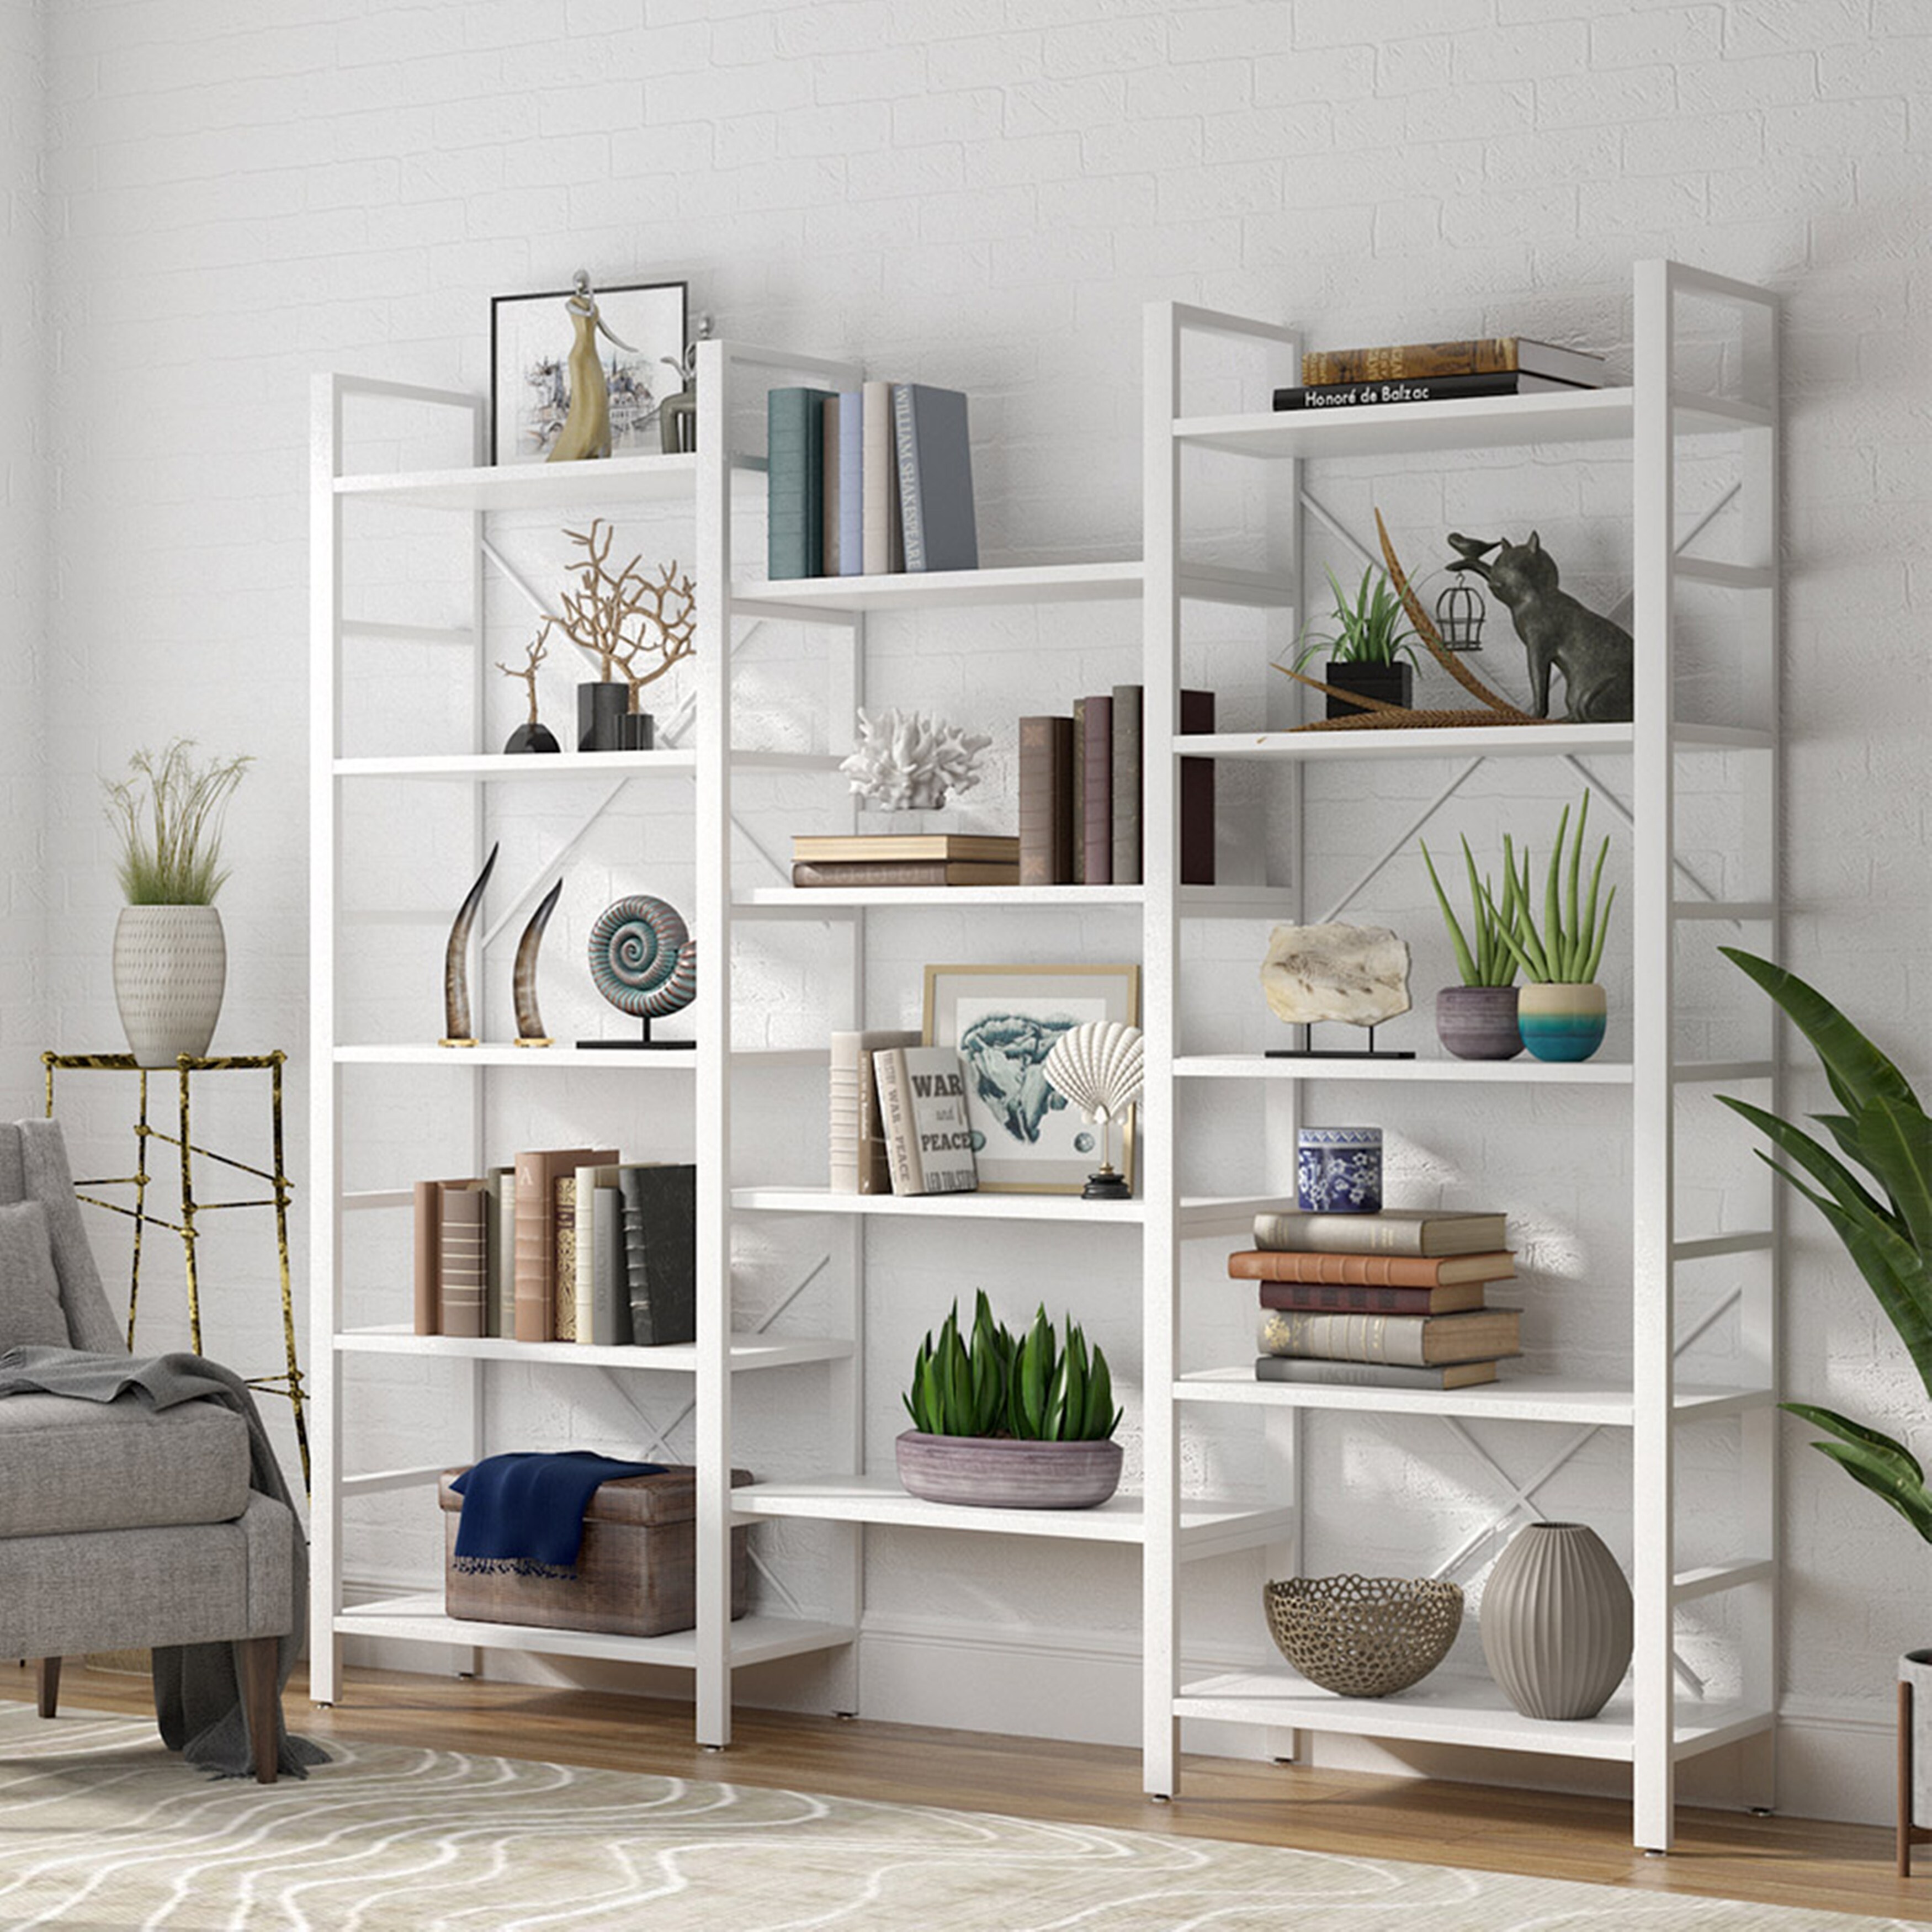 https://ak1.ostkcdn.com/images/products/is/images/direct/4ea5cf6f6f4f7064d9a9bfcd681babbb7a4a1c8c/Triple-Wide-5-Shelf-Bookcase%2C-Etagere-Large-Open-Bookshelf.jpg